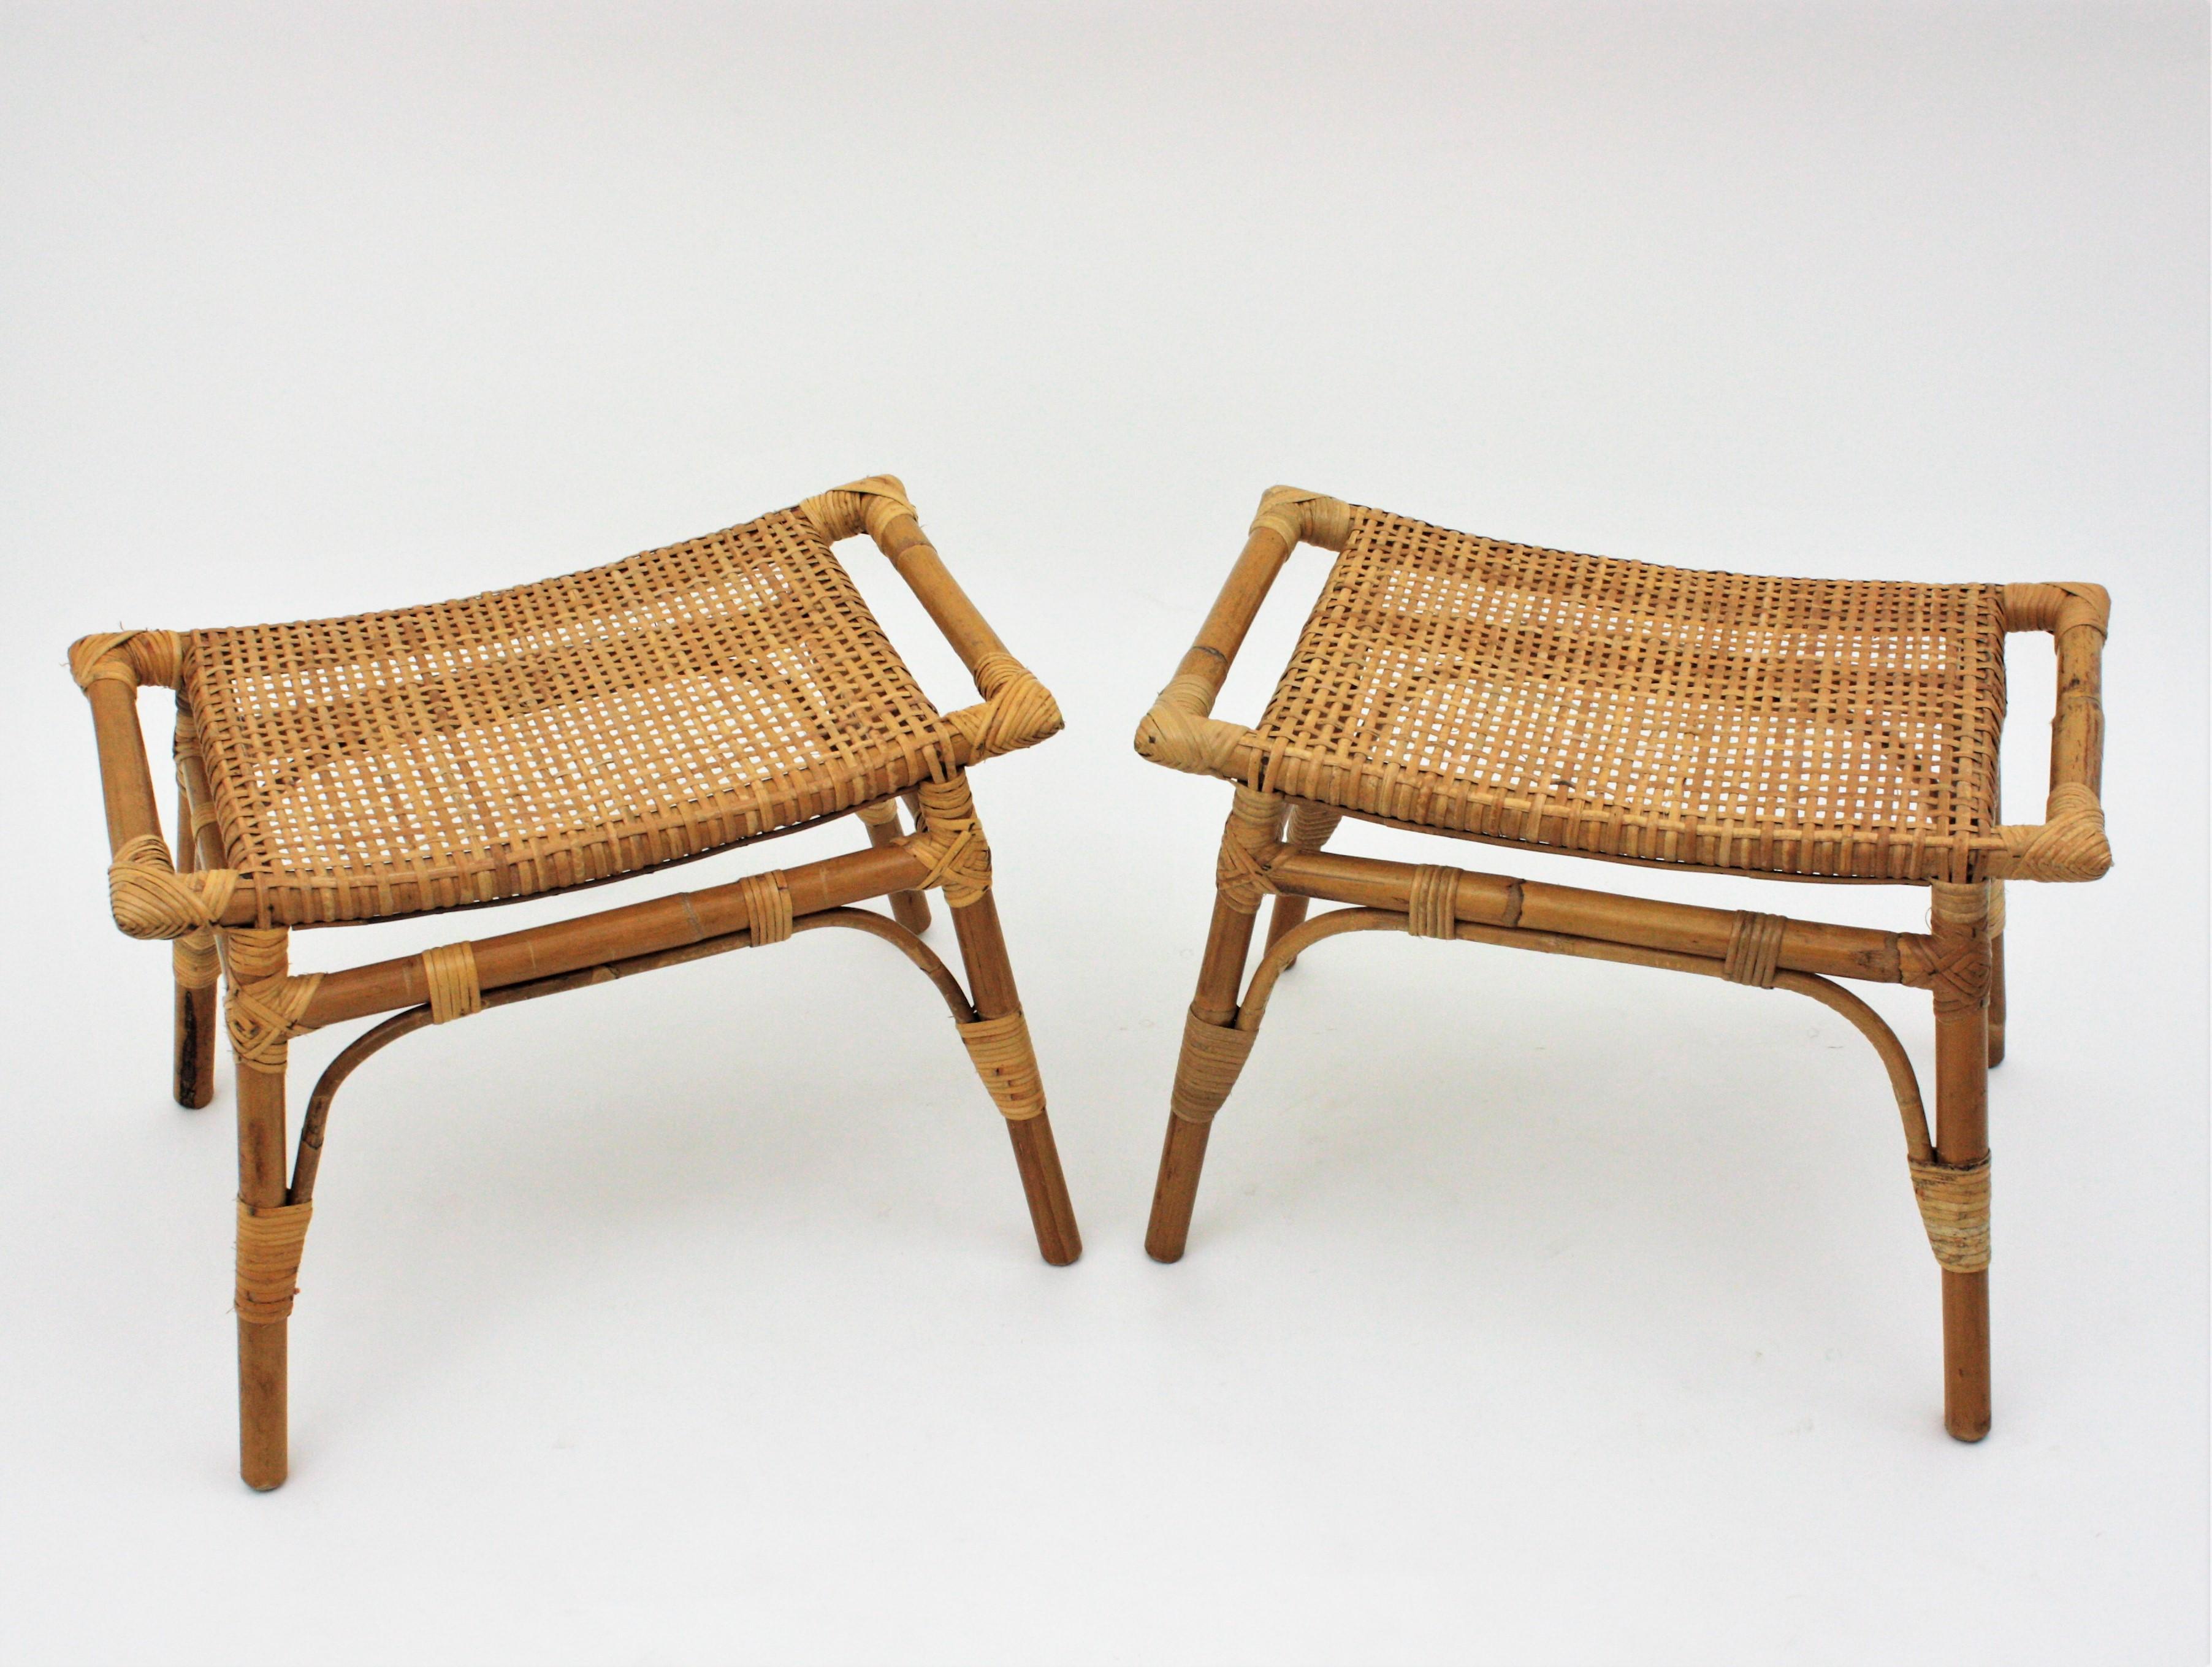 Pair of Bamboo Stools, Benches or Ottoman with Woven Wicker Cane Seats 4